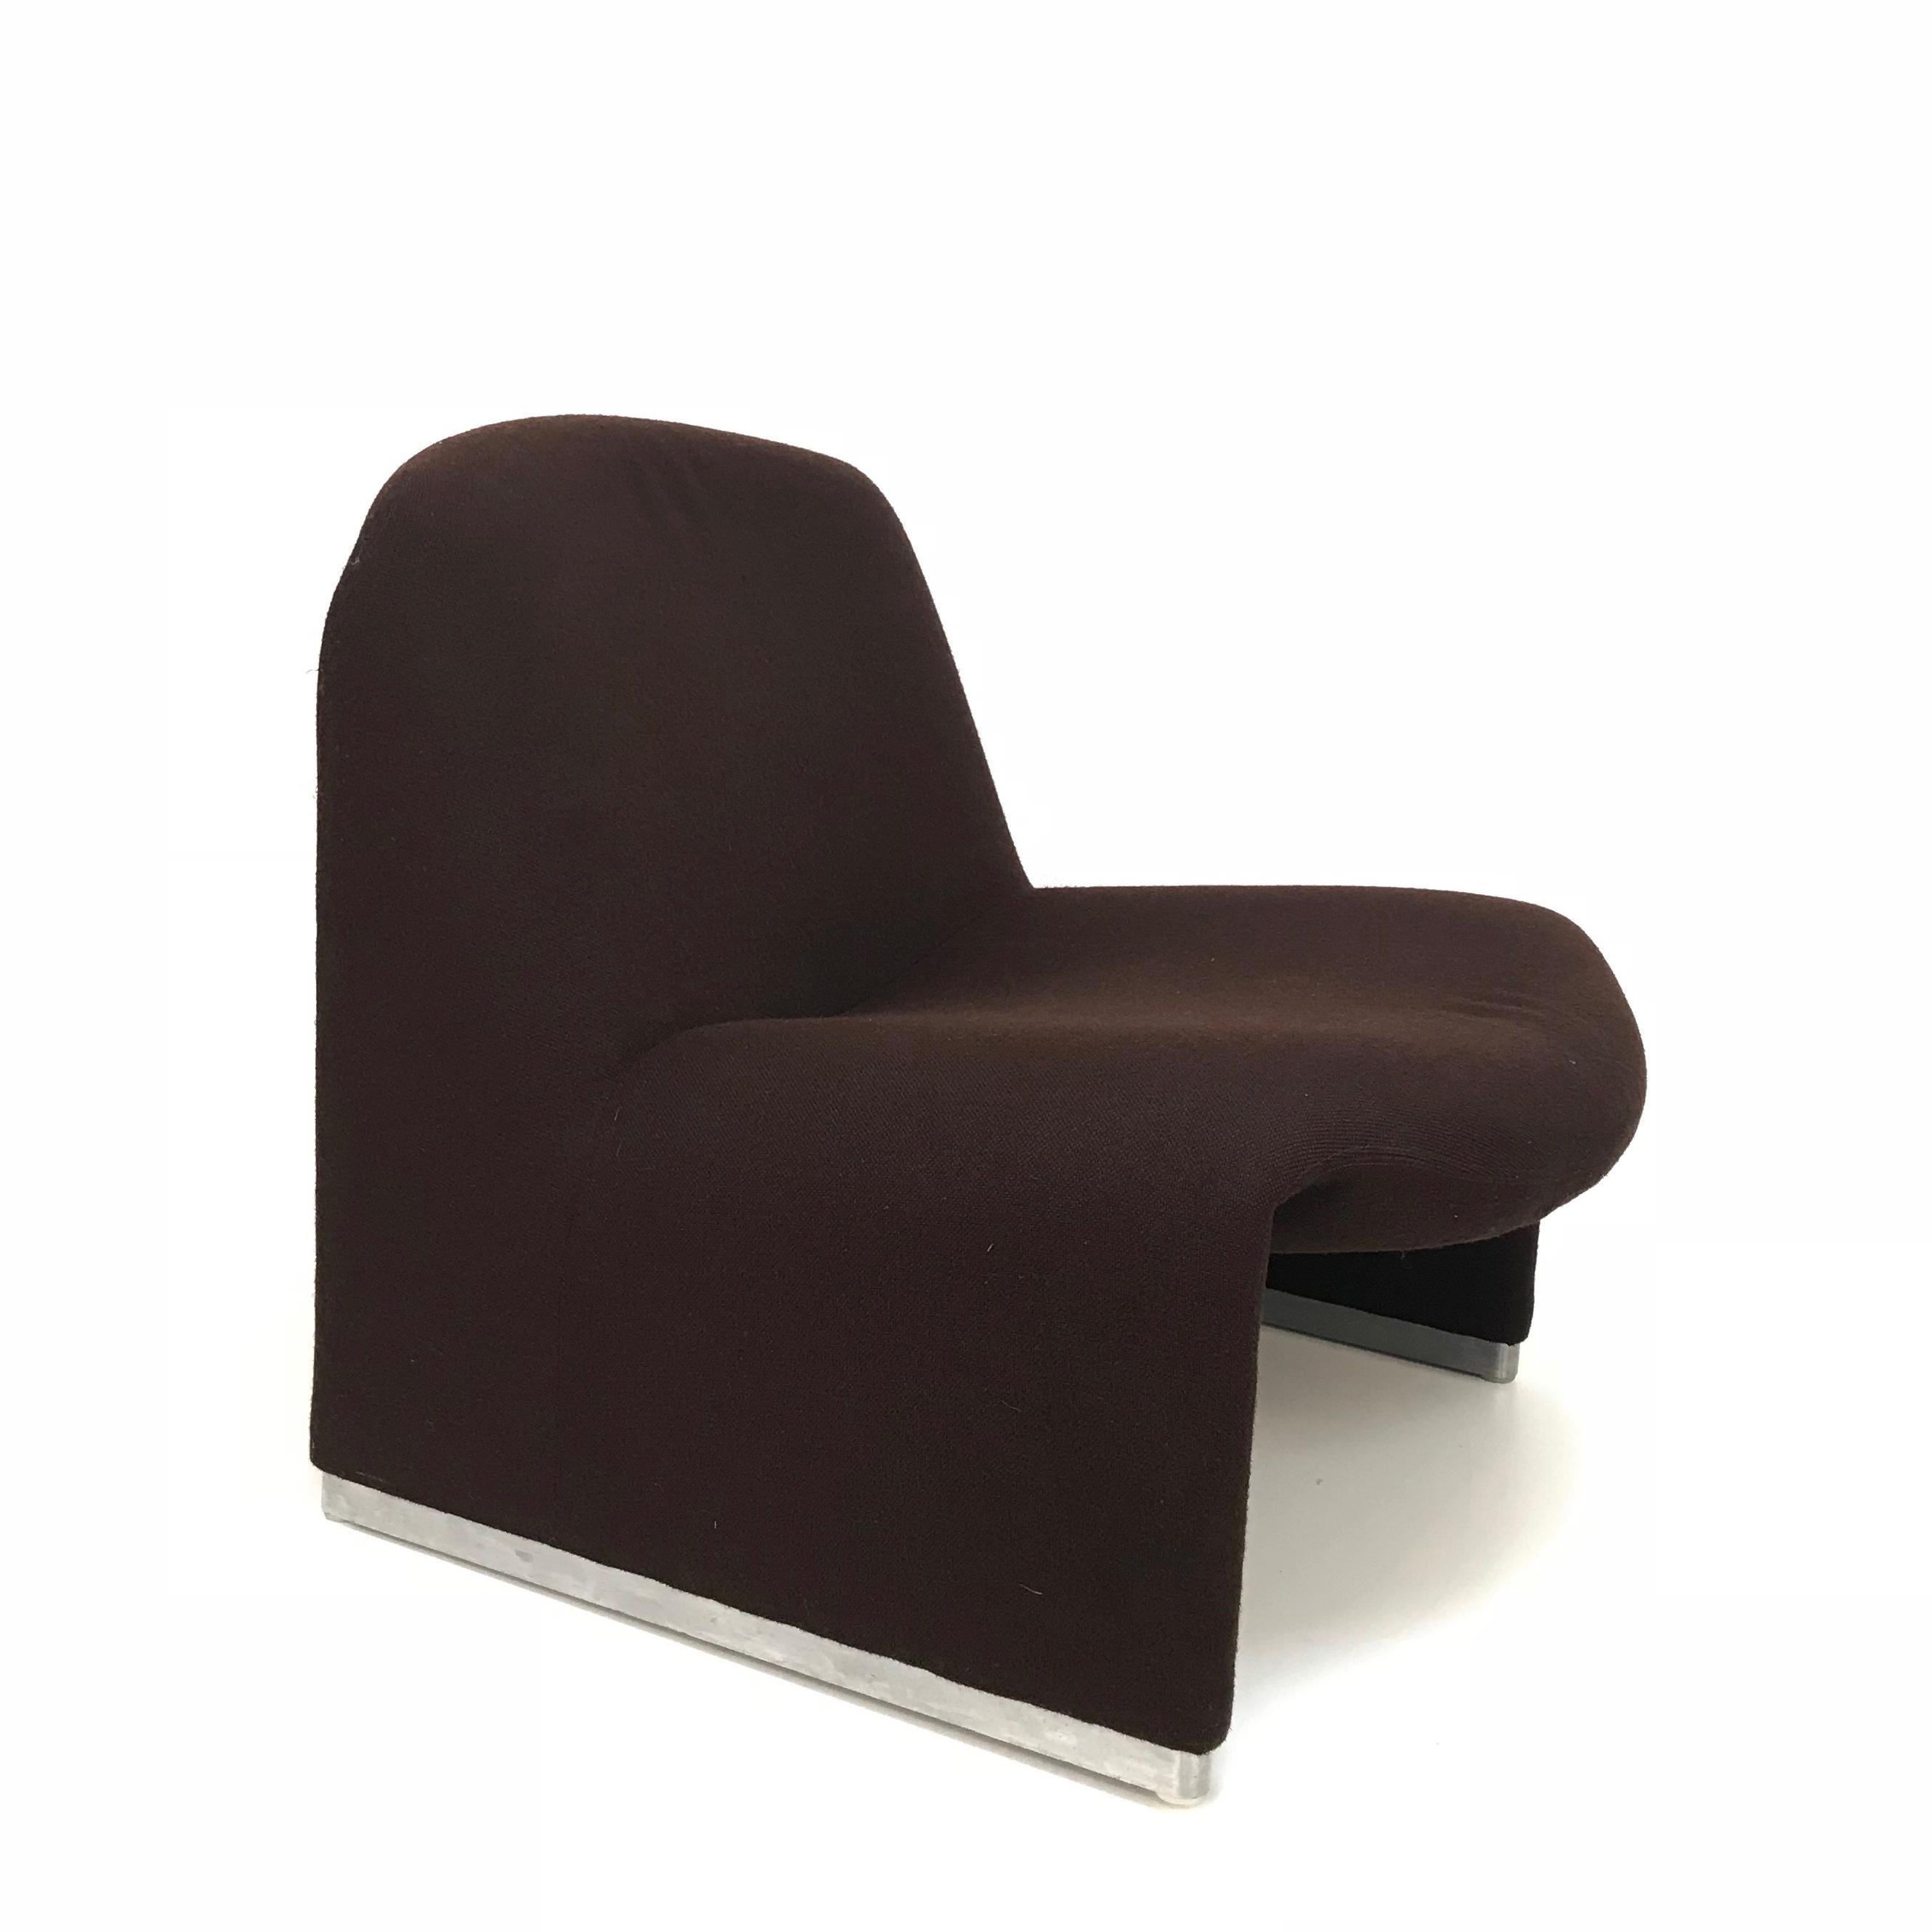 Late 20th Century Brown Alky Armchair by Giancarlo Piretti for Castelli, Italy, 1970s